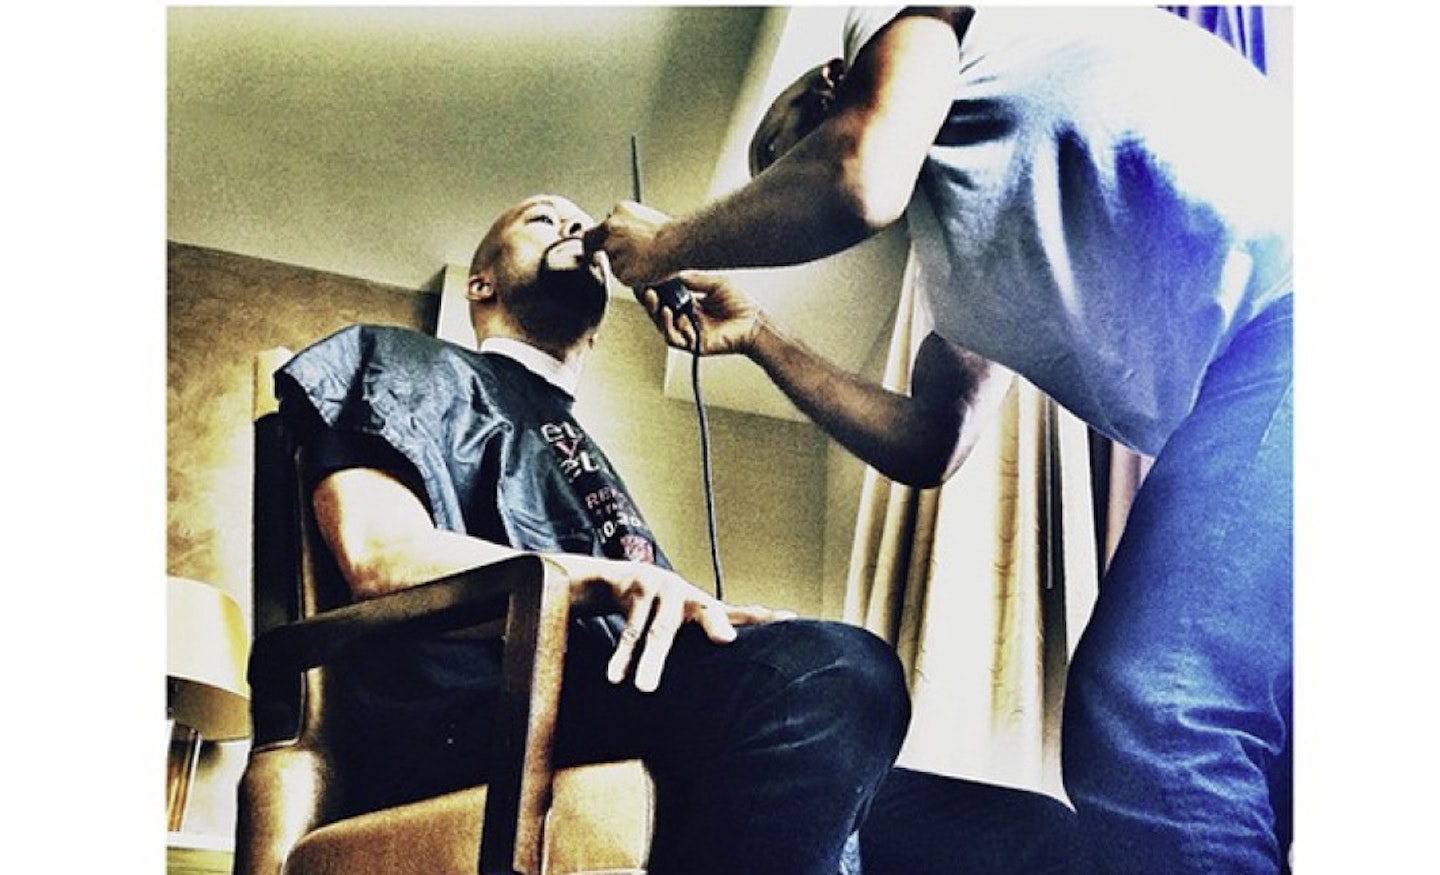 common Getting sliced by my guy Junior! @thegrammys